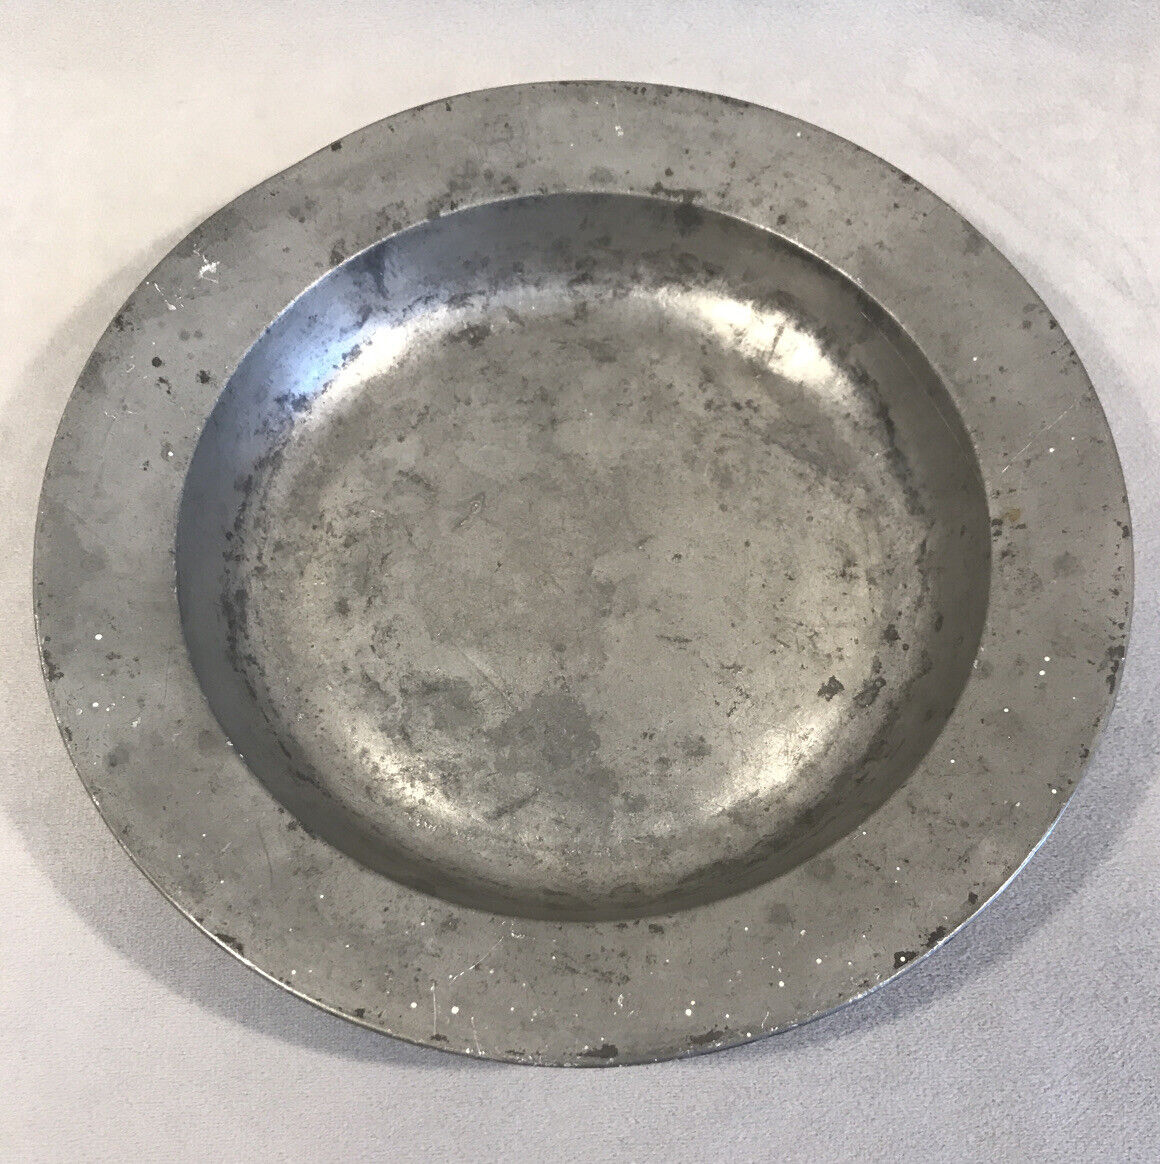 PV04851 Antique 18th Century London Pewter Wide Rimmed Bowl